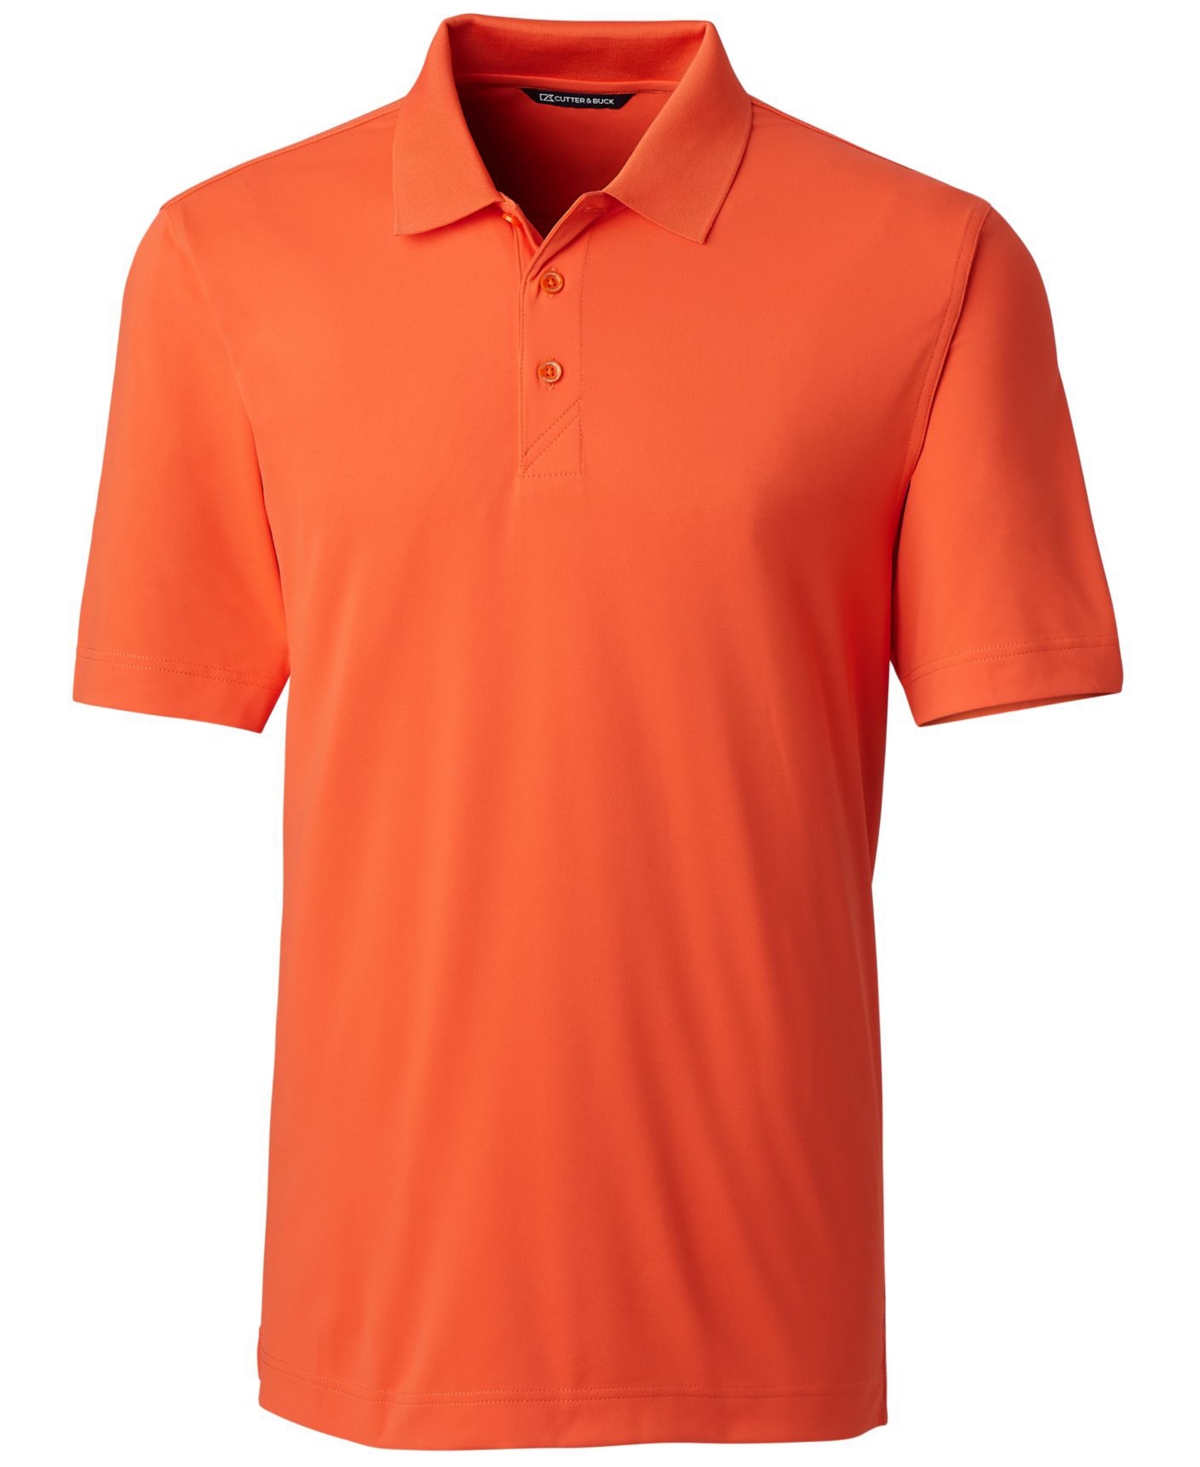 Forge Stretch Men's Tall Polo Shirt - Polished